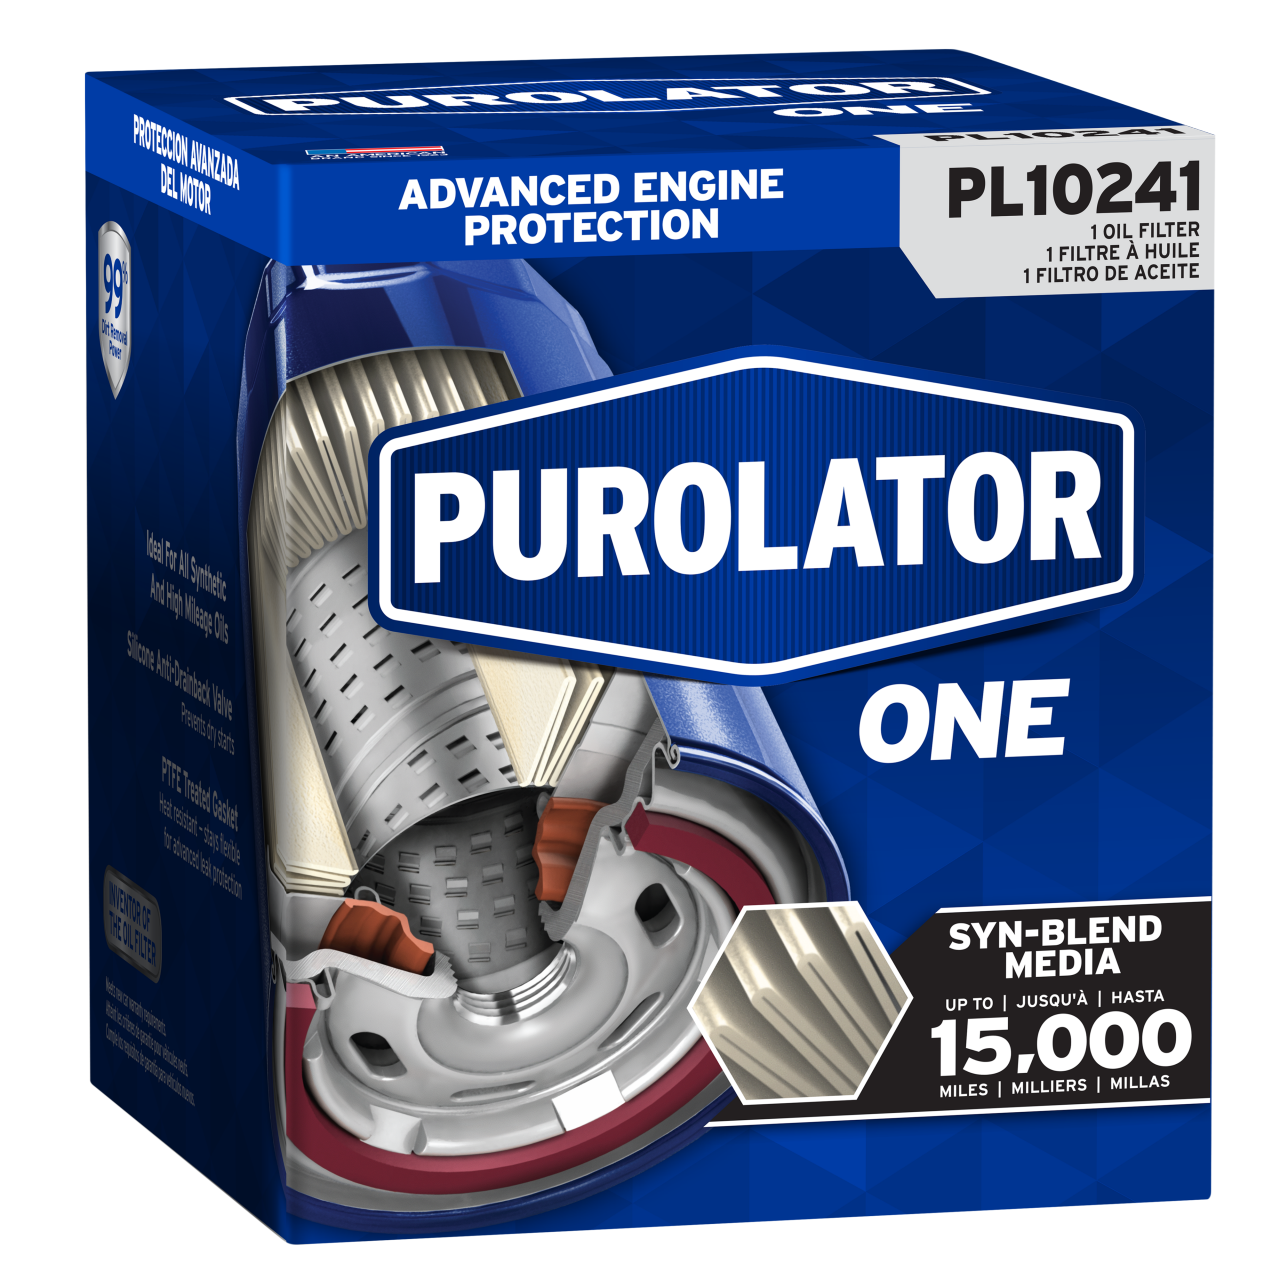 For your next oil change, remember that PurolatorONE™ Oil Filters offer up to 15,000 miles of advanced engine protection.